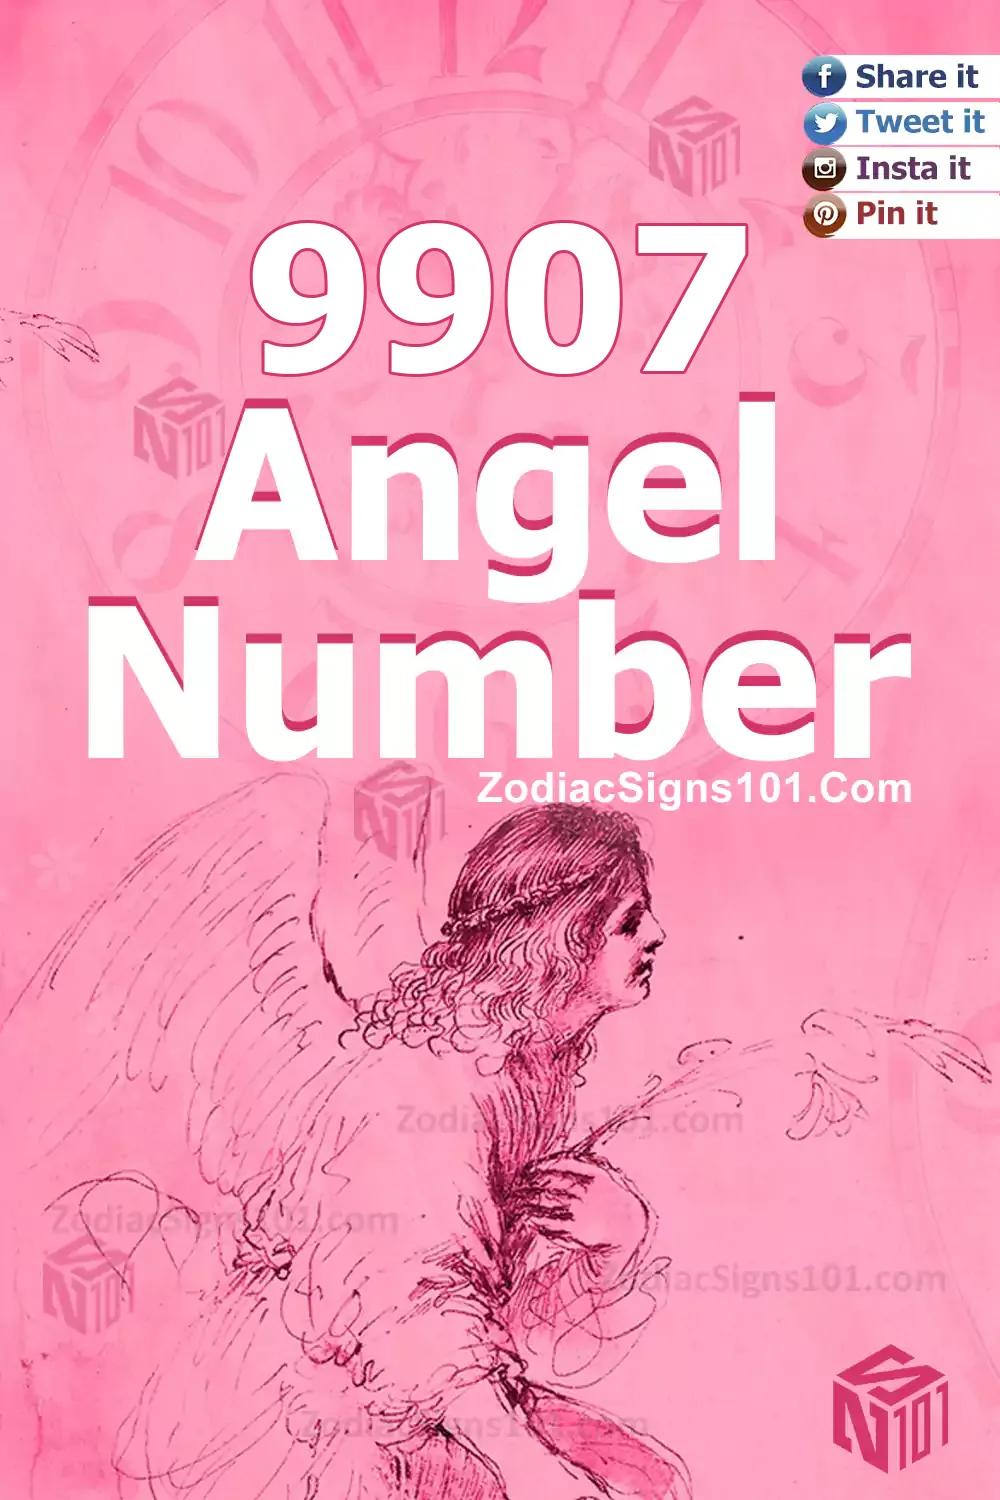 9907 Angel Number Meaning